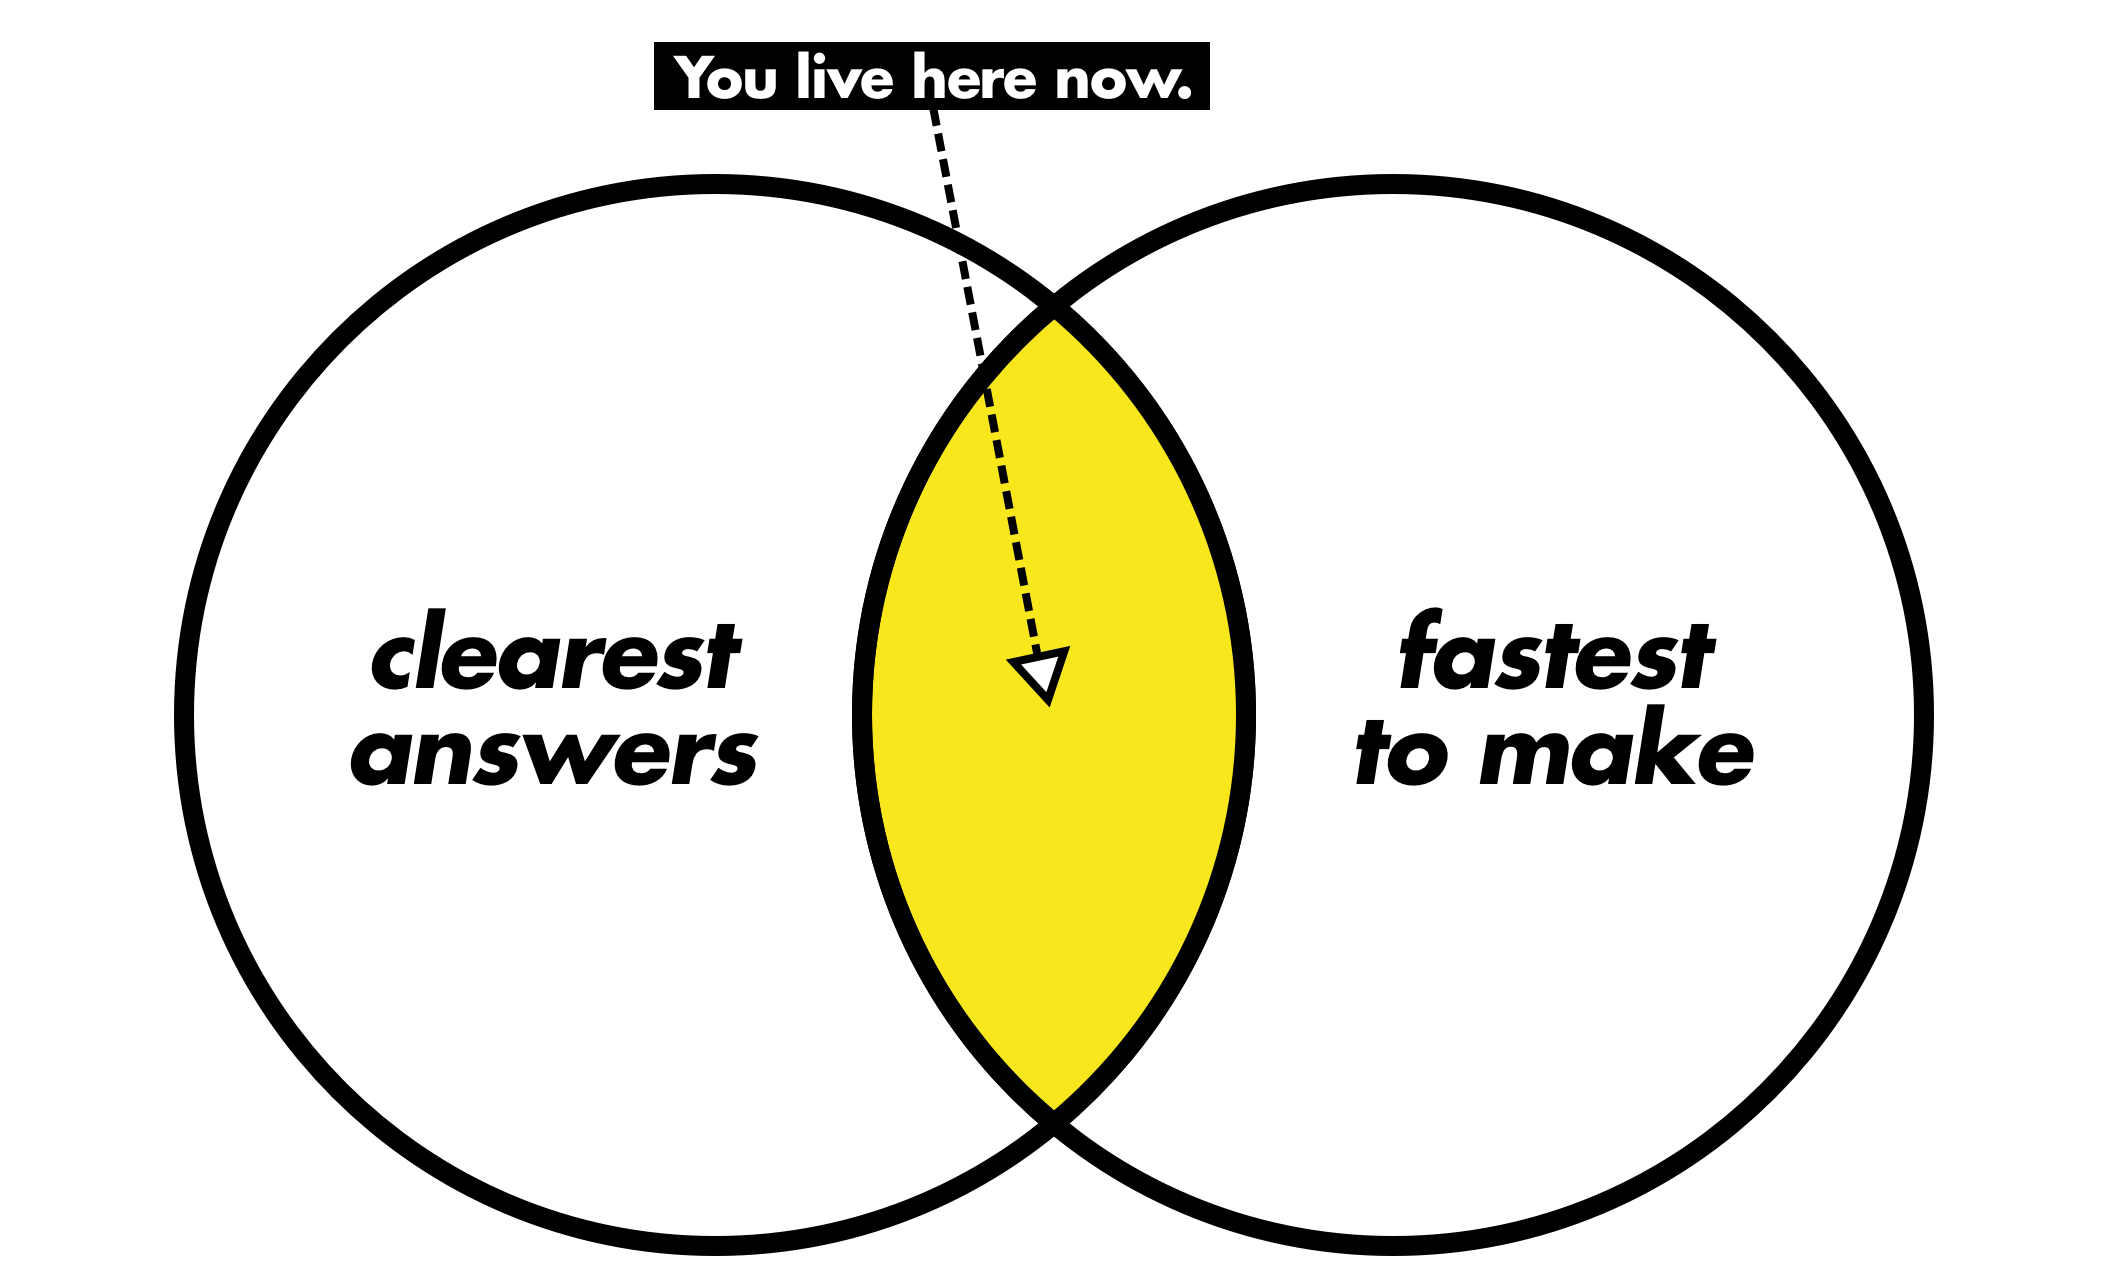 A venn diagram of 'clearest answers' and 'fastest to make'.